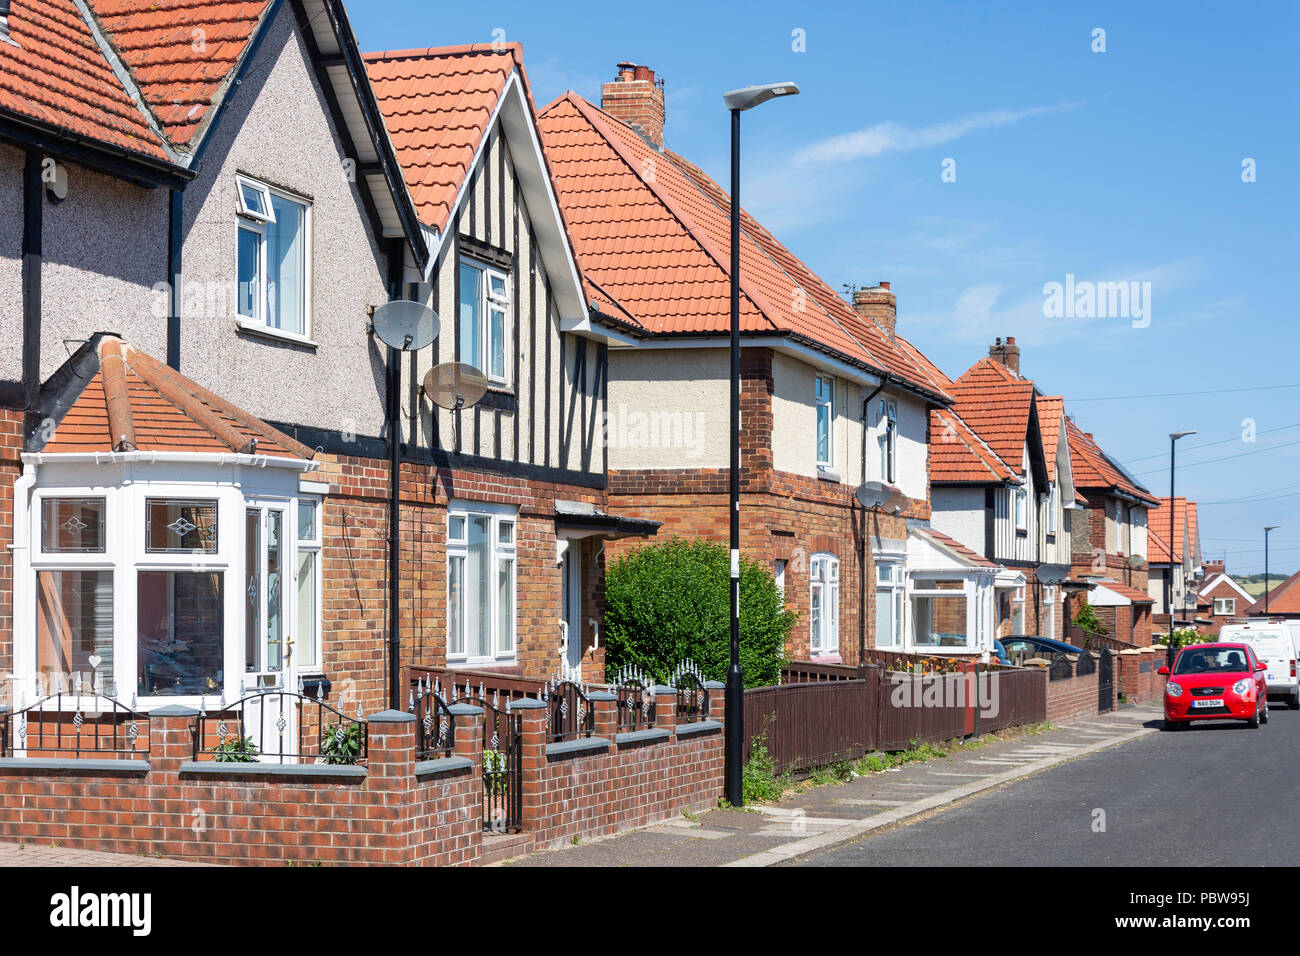 Case a schiera, Chapman Street, Fulwell, Sunderland, Tyne and Wear, England, Regno Unito Foto Stock